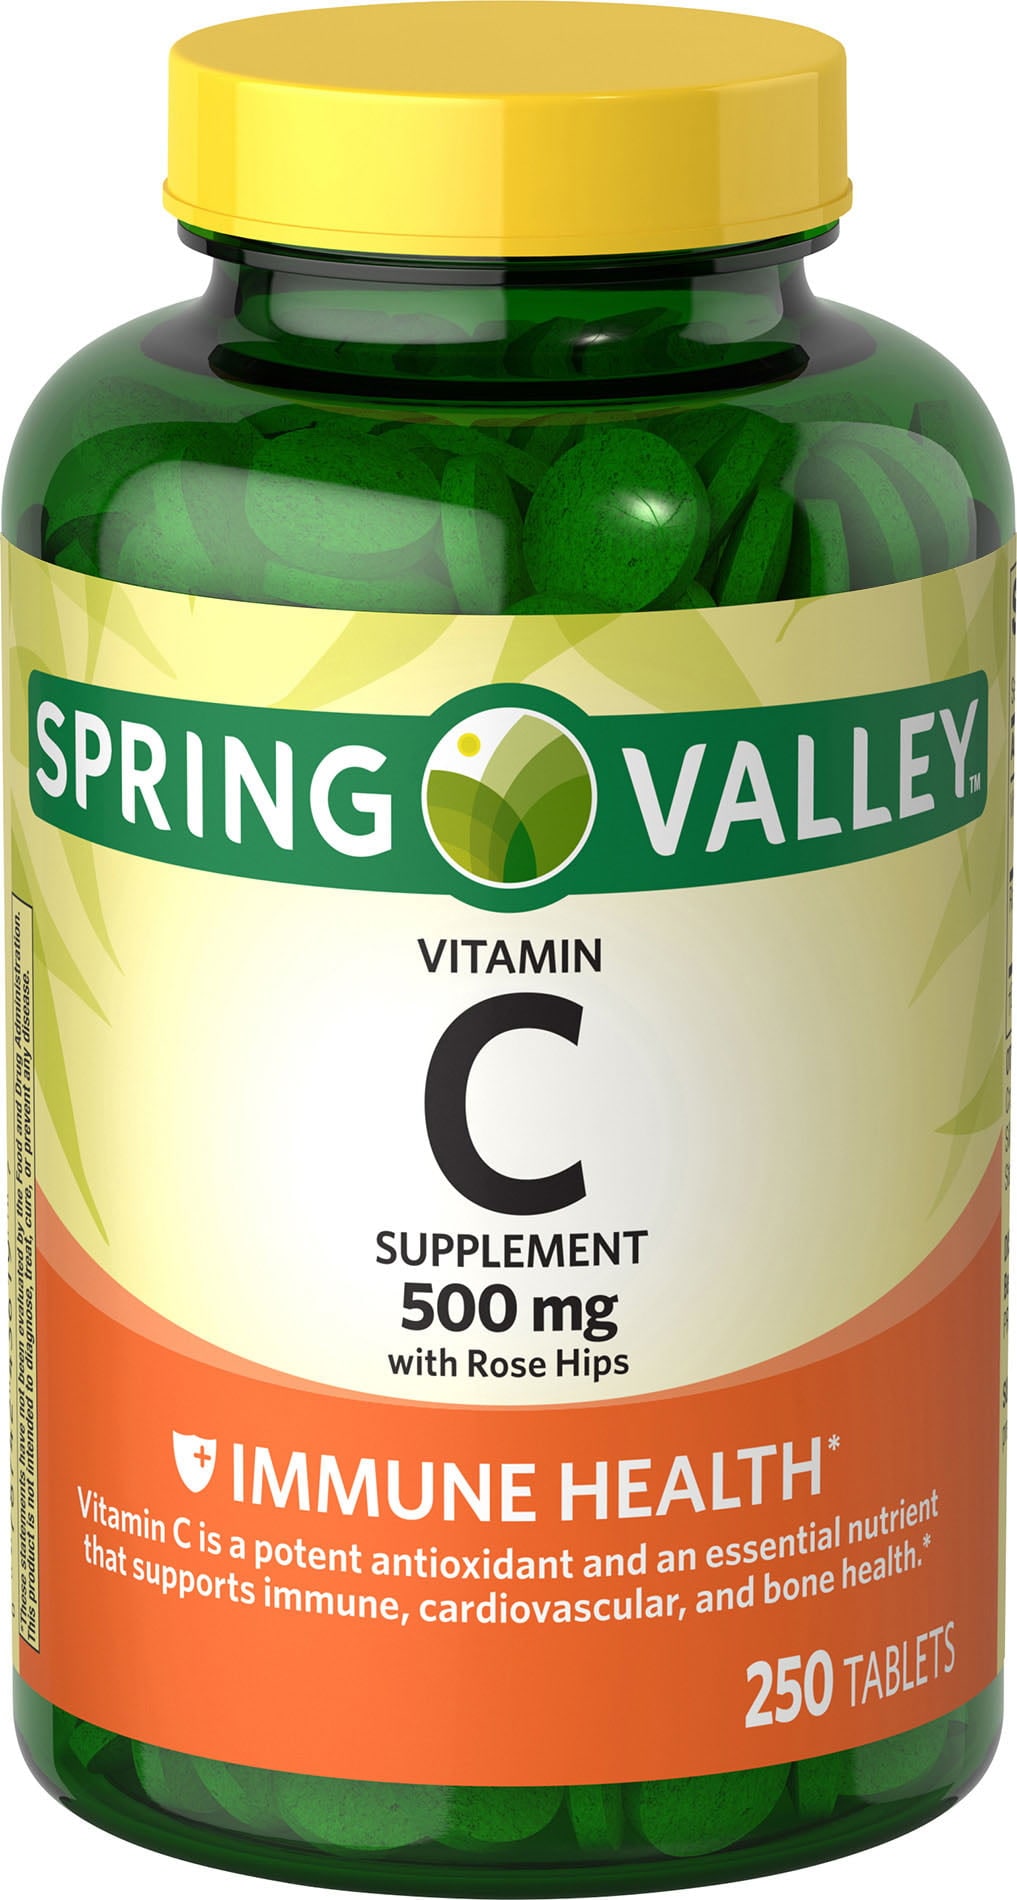 Spring Valley Vitamin C Supplement with Rose Hips, 500 mg, 250 count - DroneUp  Delivery